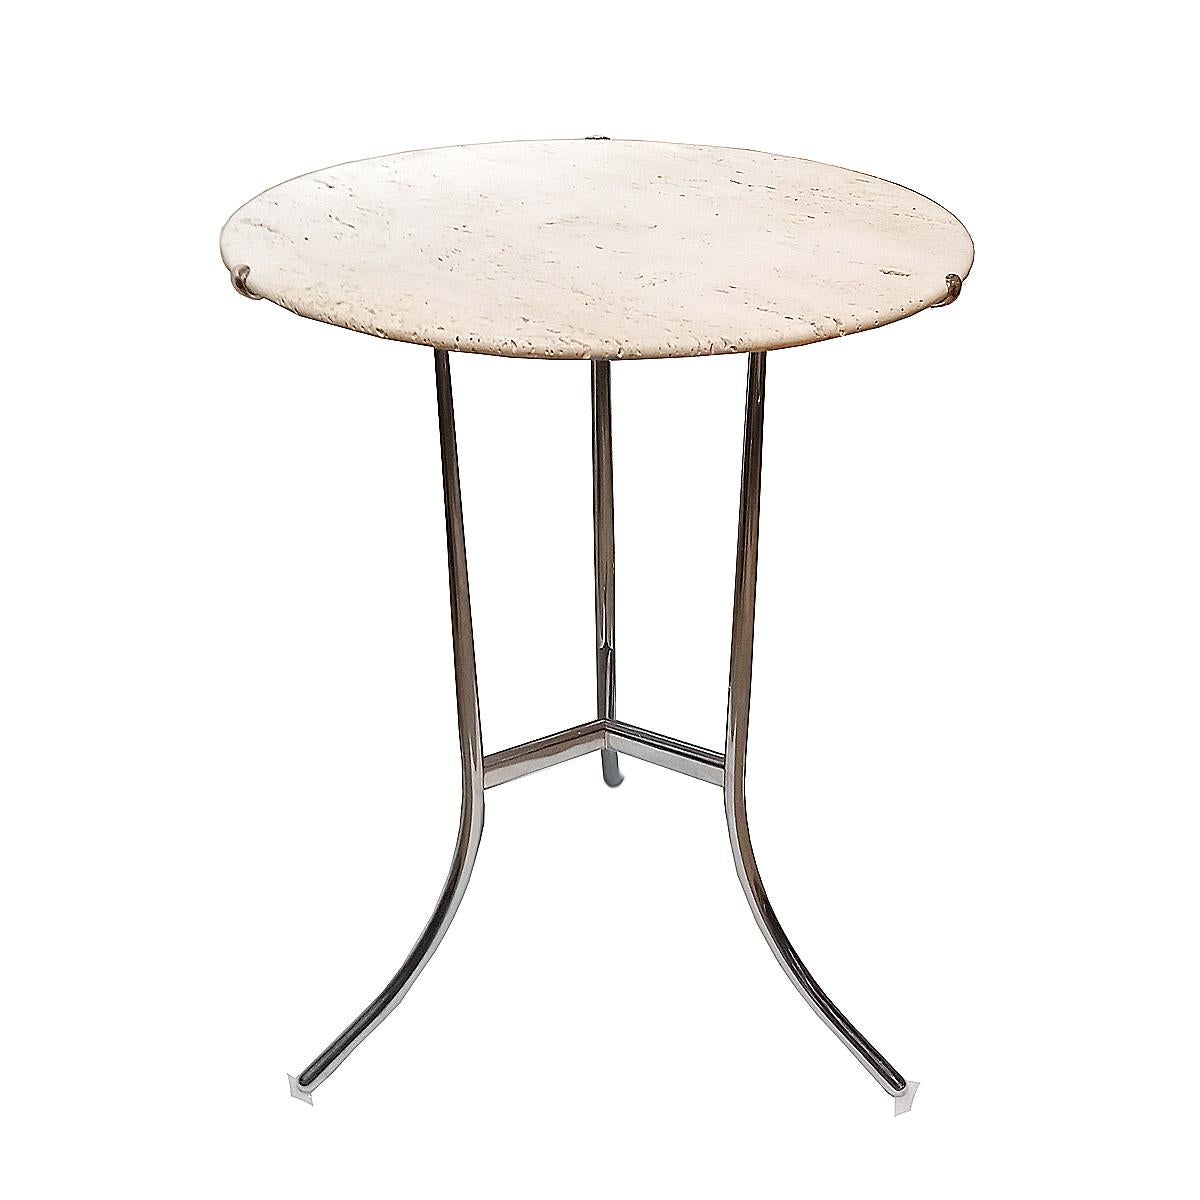 Side Table by Cedric Hartman, in Travertine Marble and Nickel-Plated Brass 7